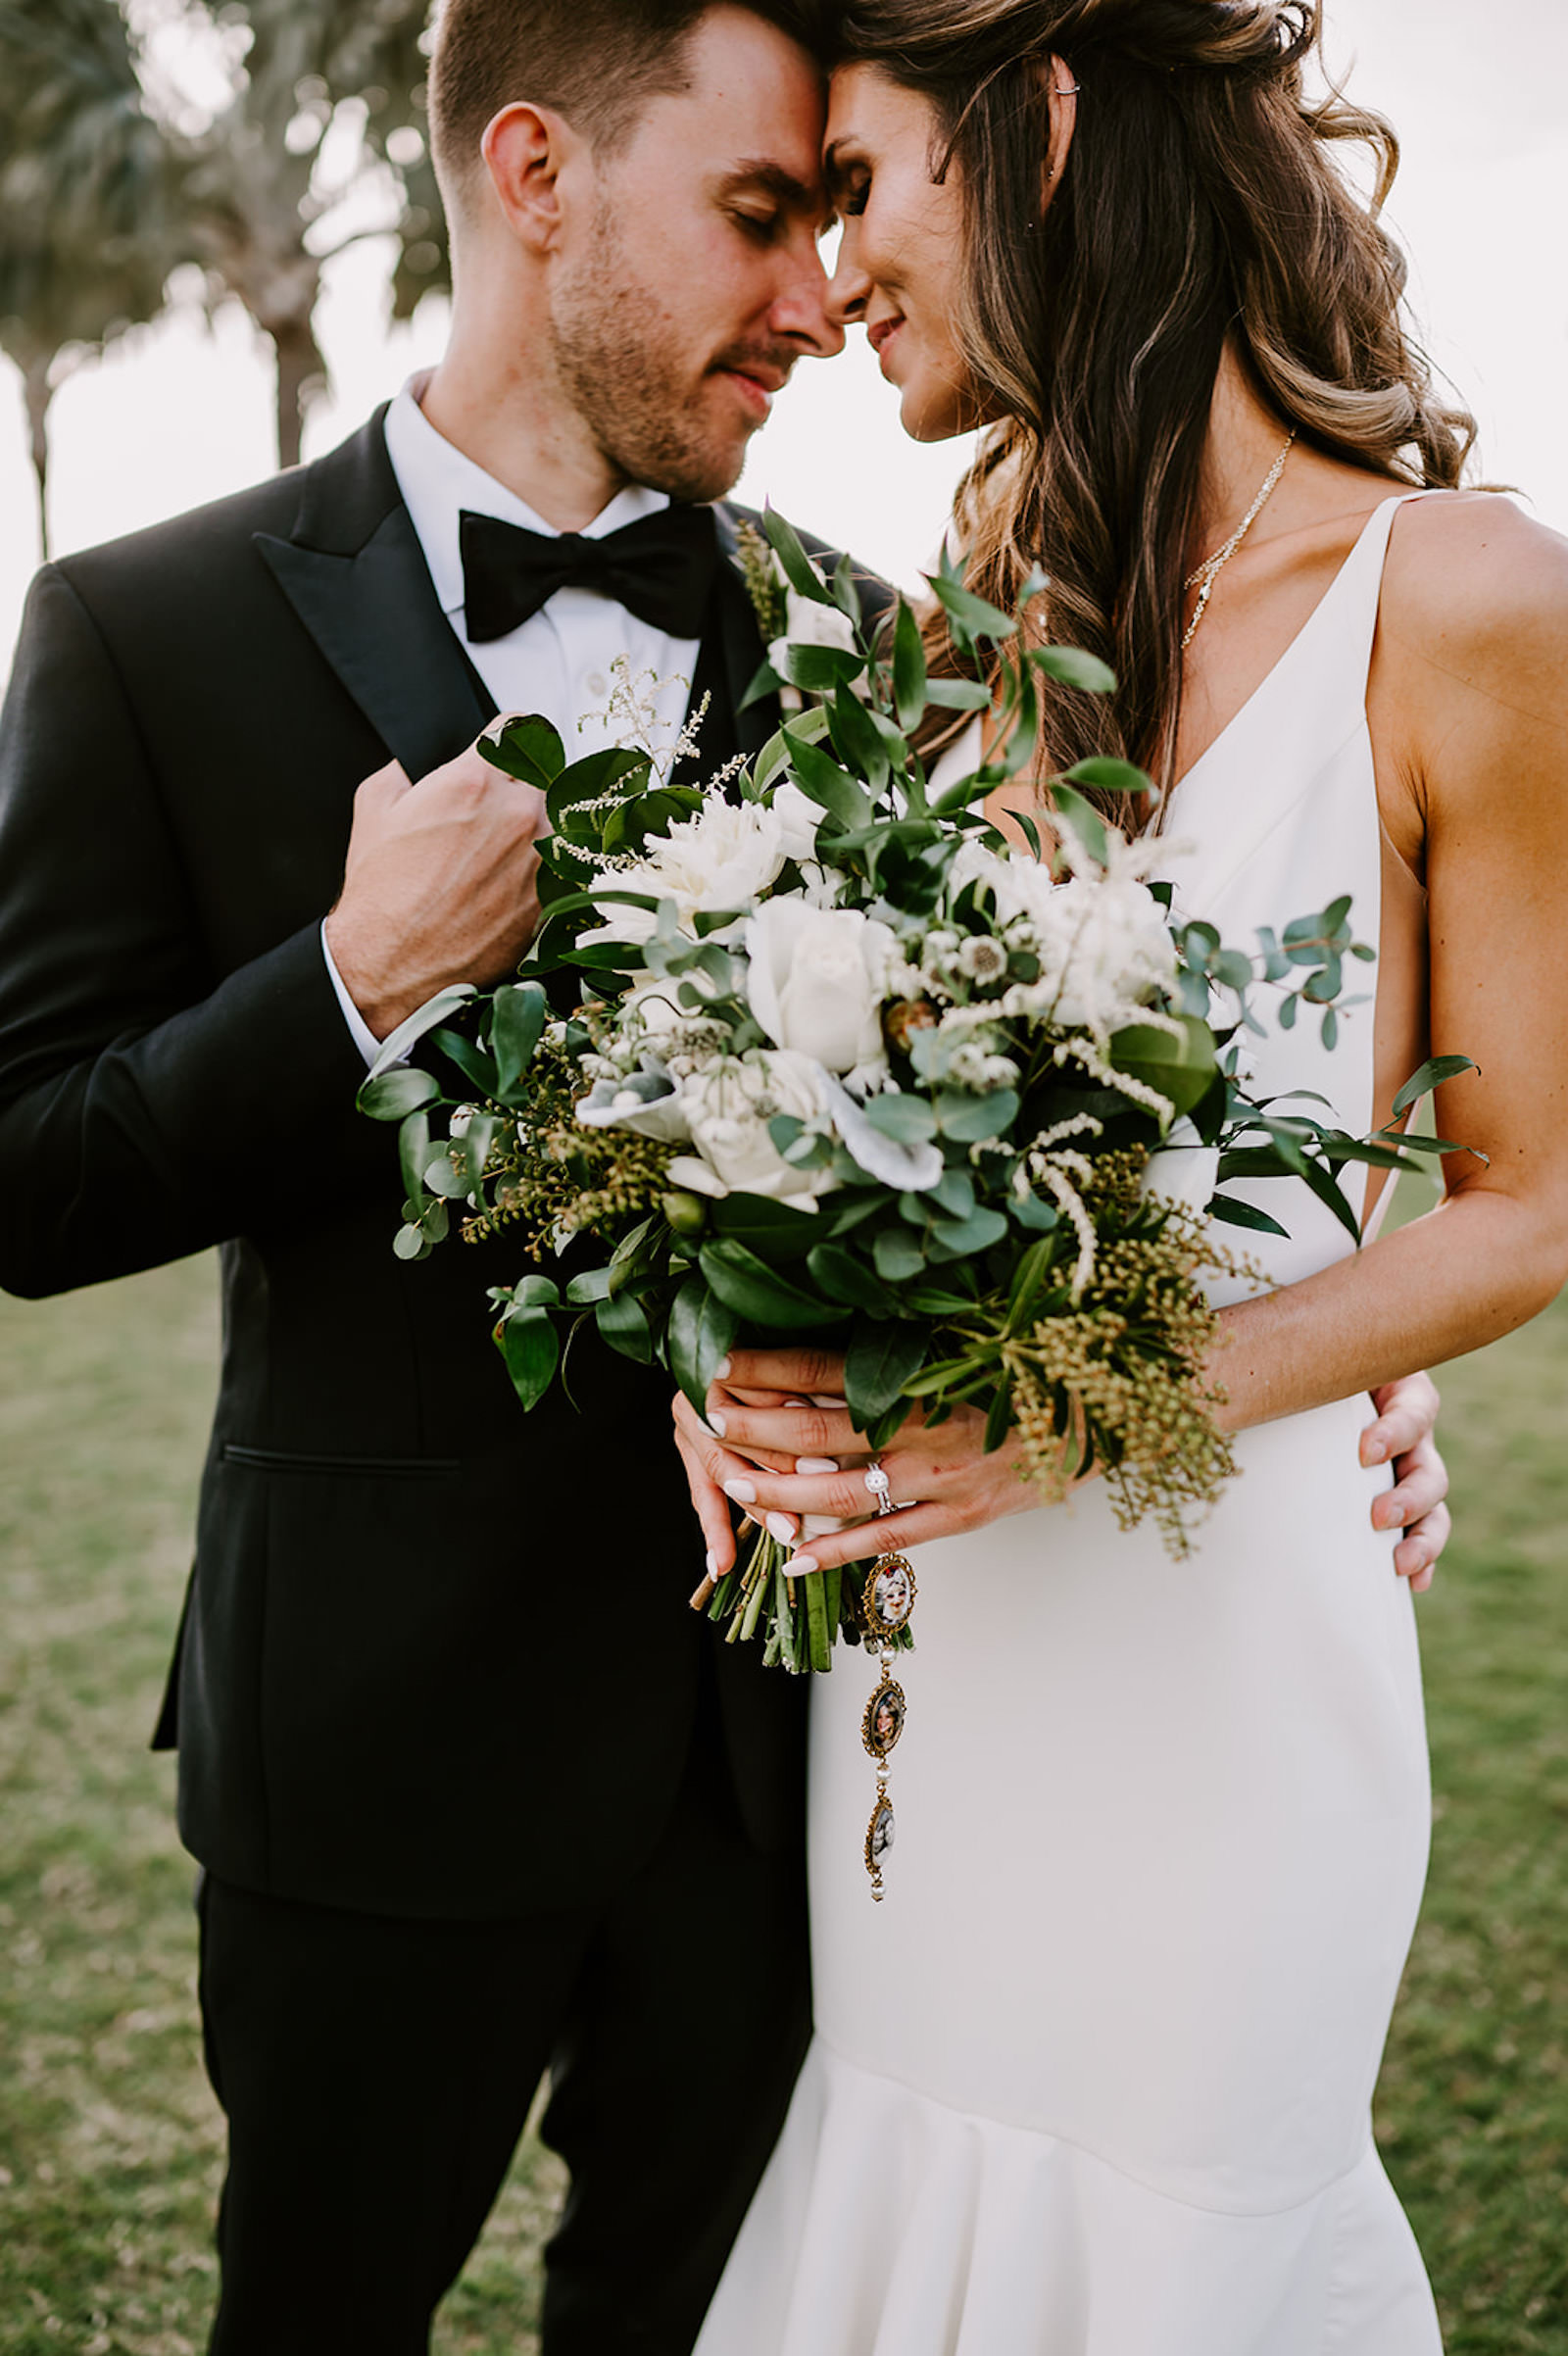 Intimate Bride and Groom Wedding Portrait | White Rose and Greenery Bridal Bouquet Ideas